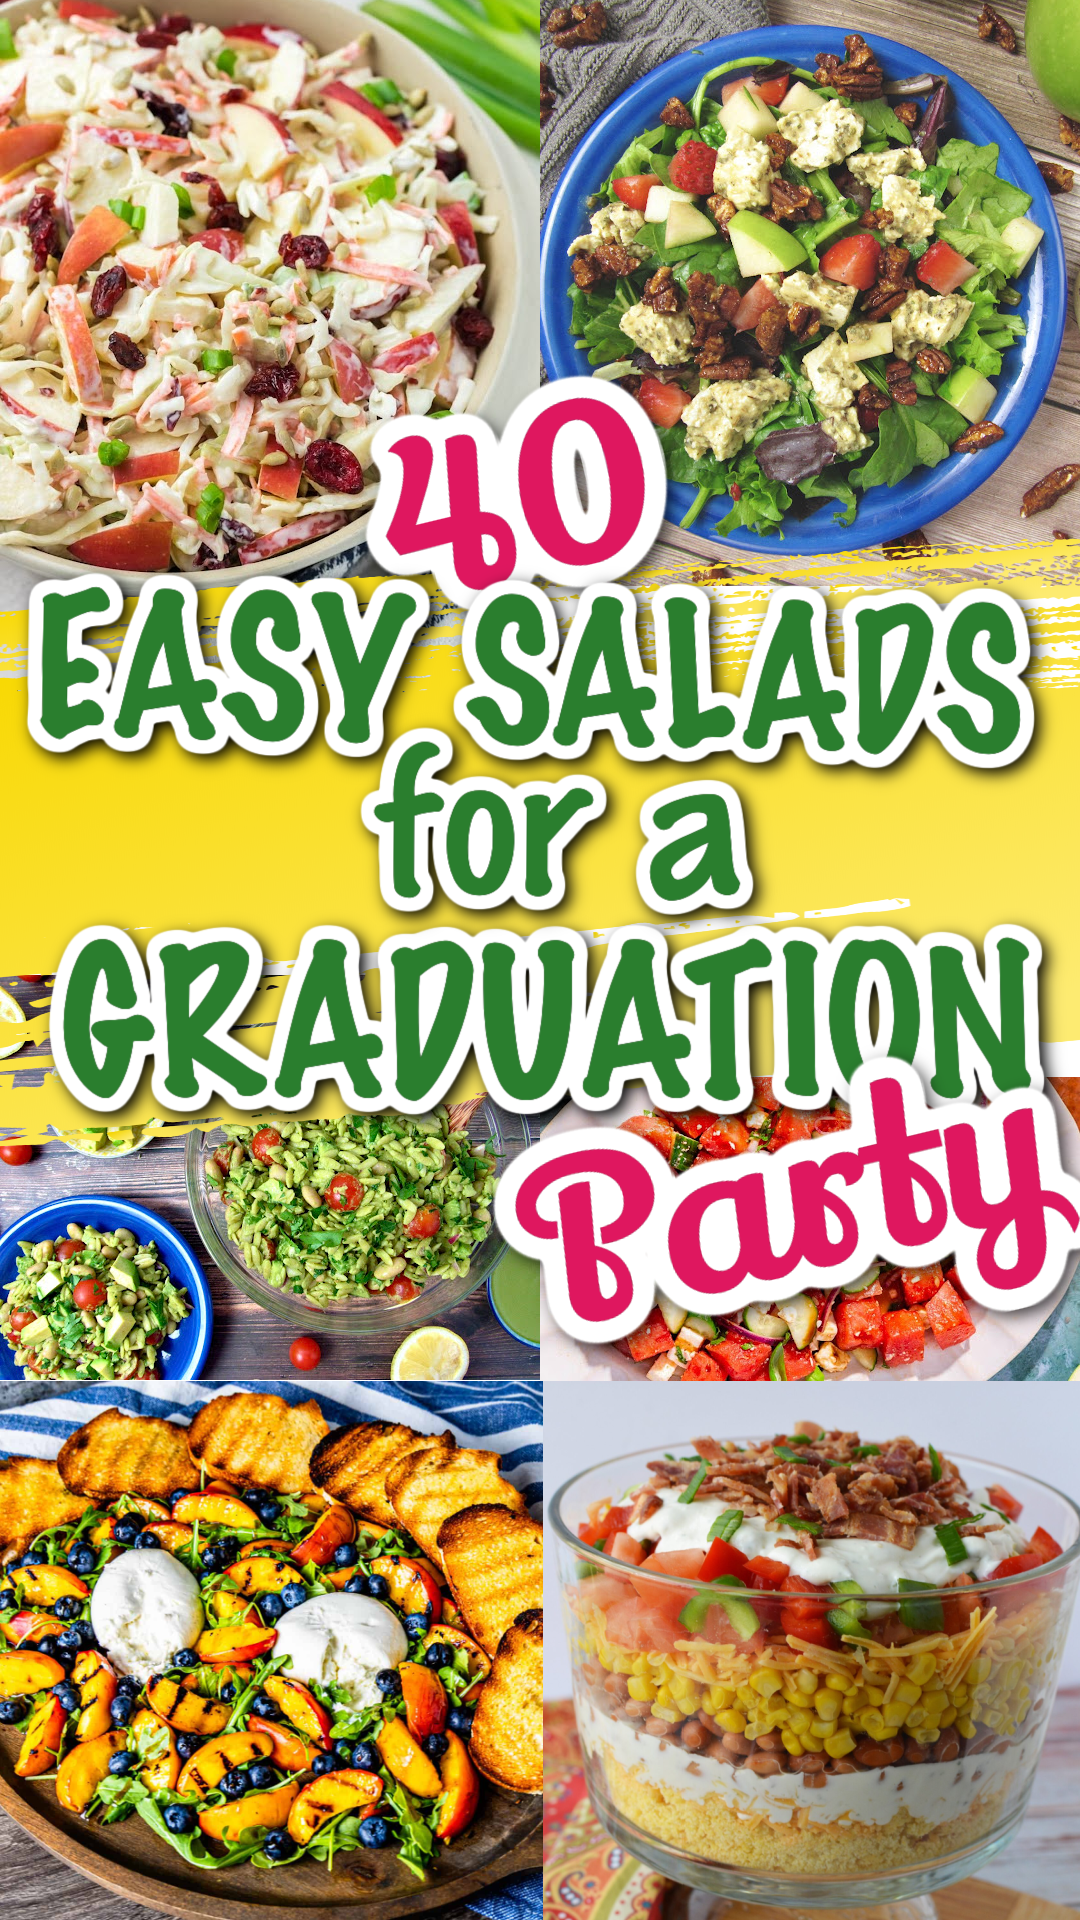 Easy Salads For A Graduation Party